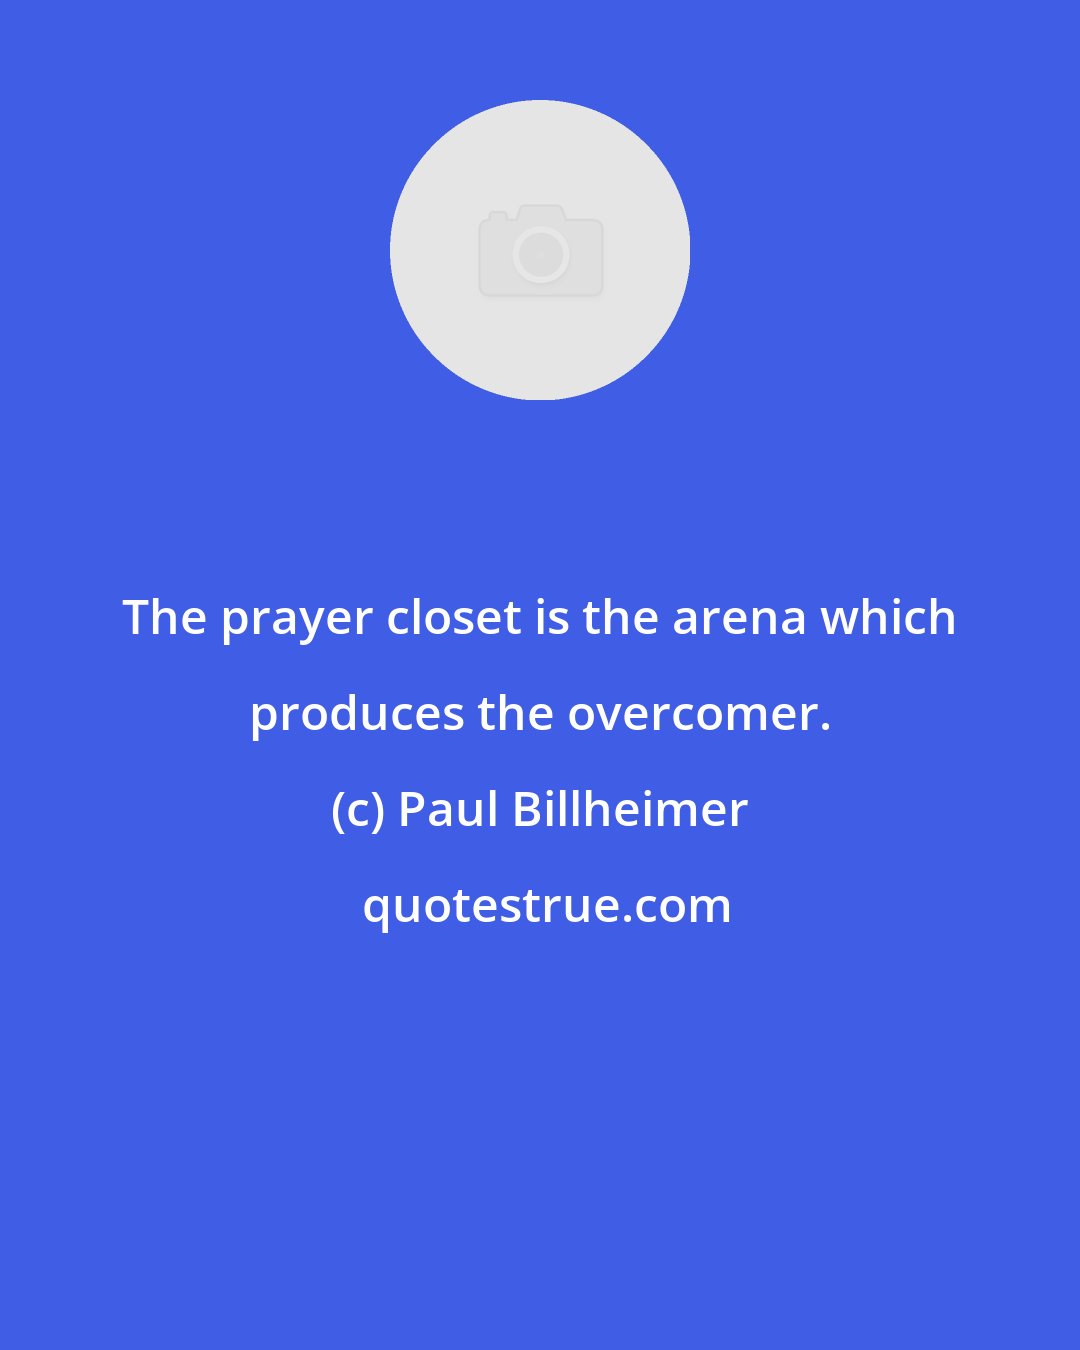 Paul Billheimer: The prayer closet is the arena which produces the overcomer.